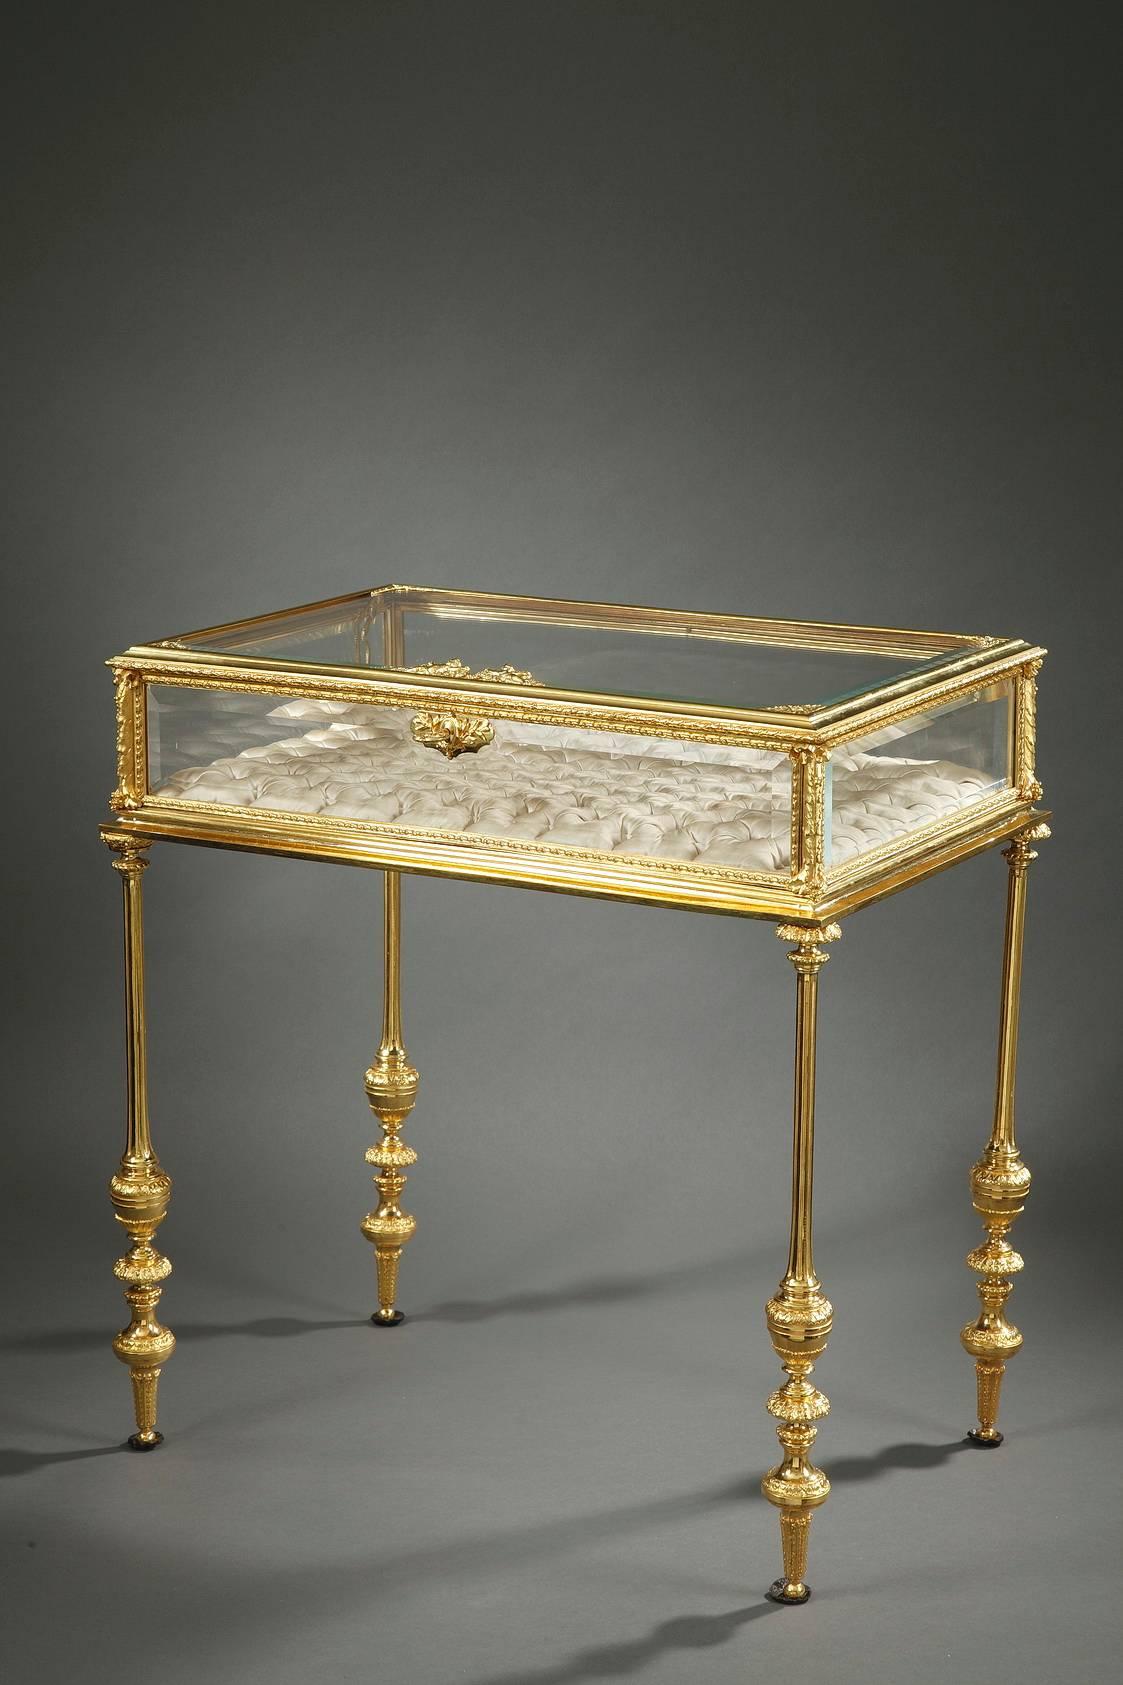 Gilt bronze and glass Napoleon III display case in neoclassical taste. It is decorated with friezes of laurel leaves, small flowers, and angels holding garlands. The case is supported by four slender, fluted legs that descend to meet three foliated